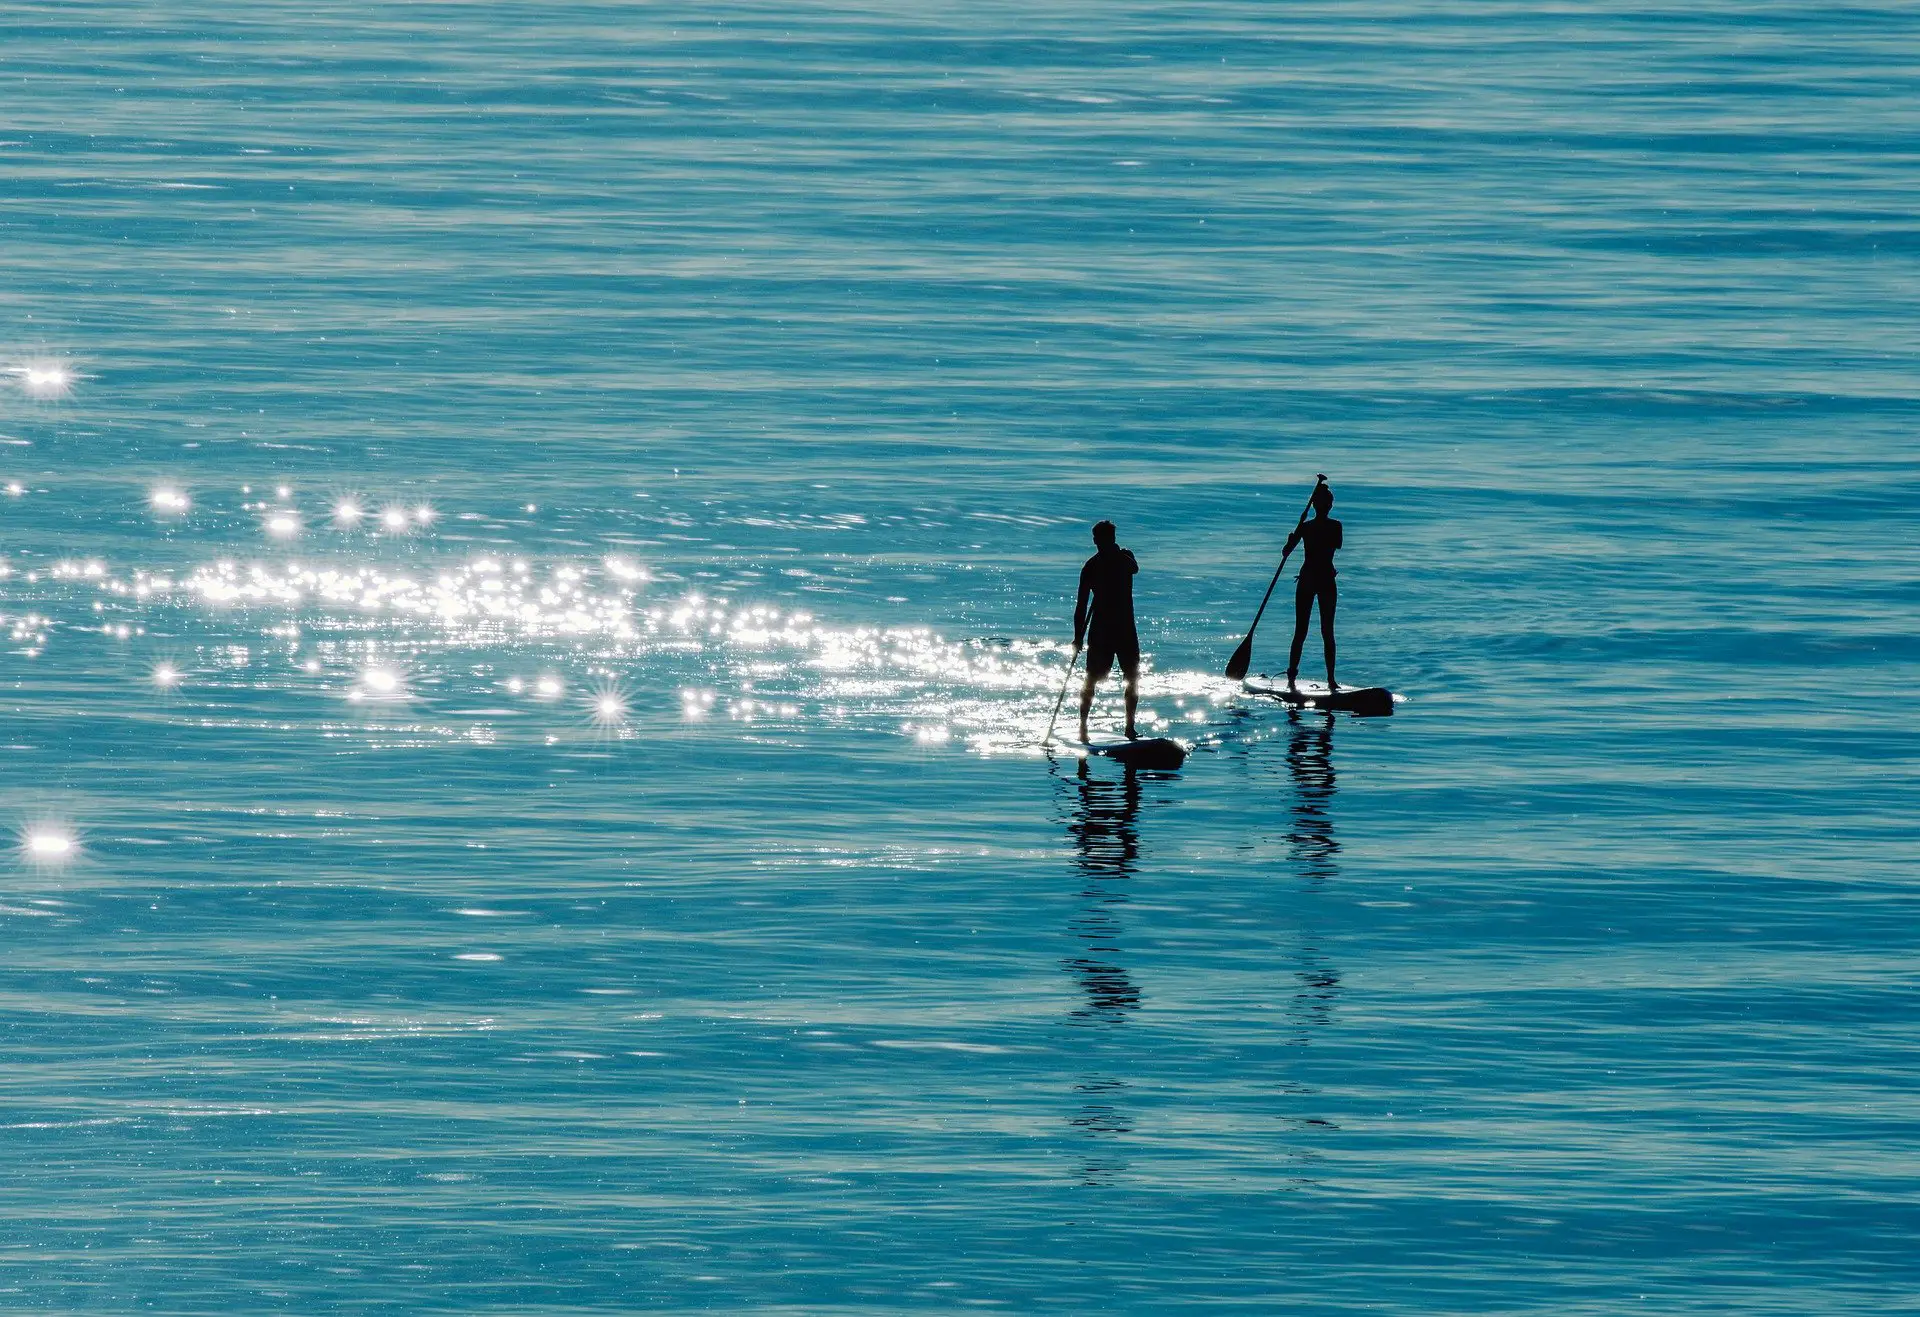 Man and Woman going straight on a stand up paddle board on a lake